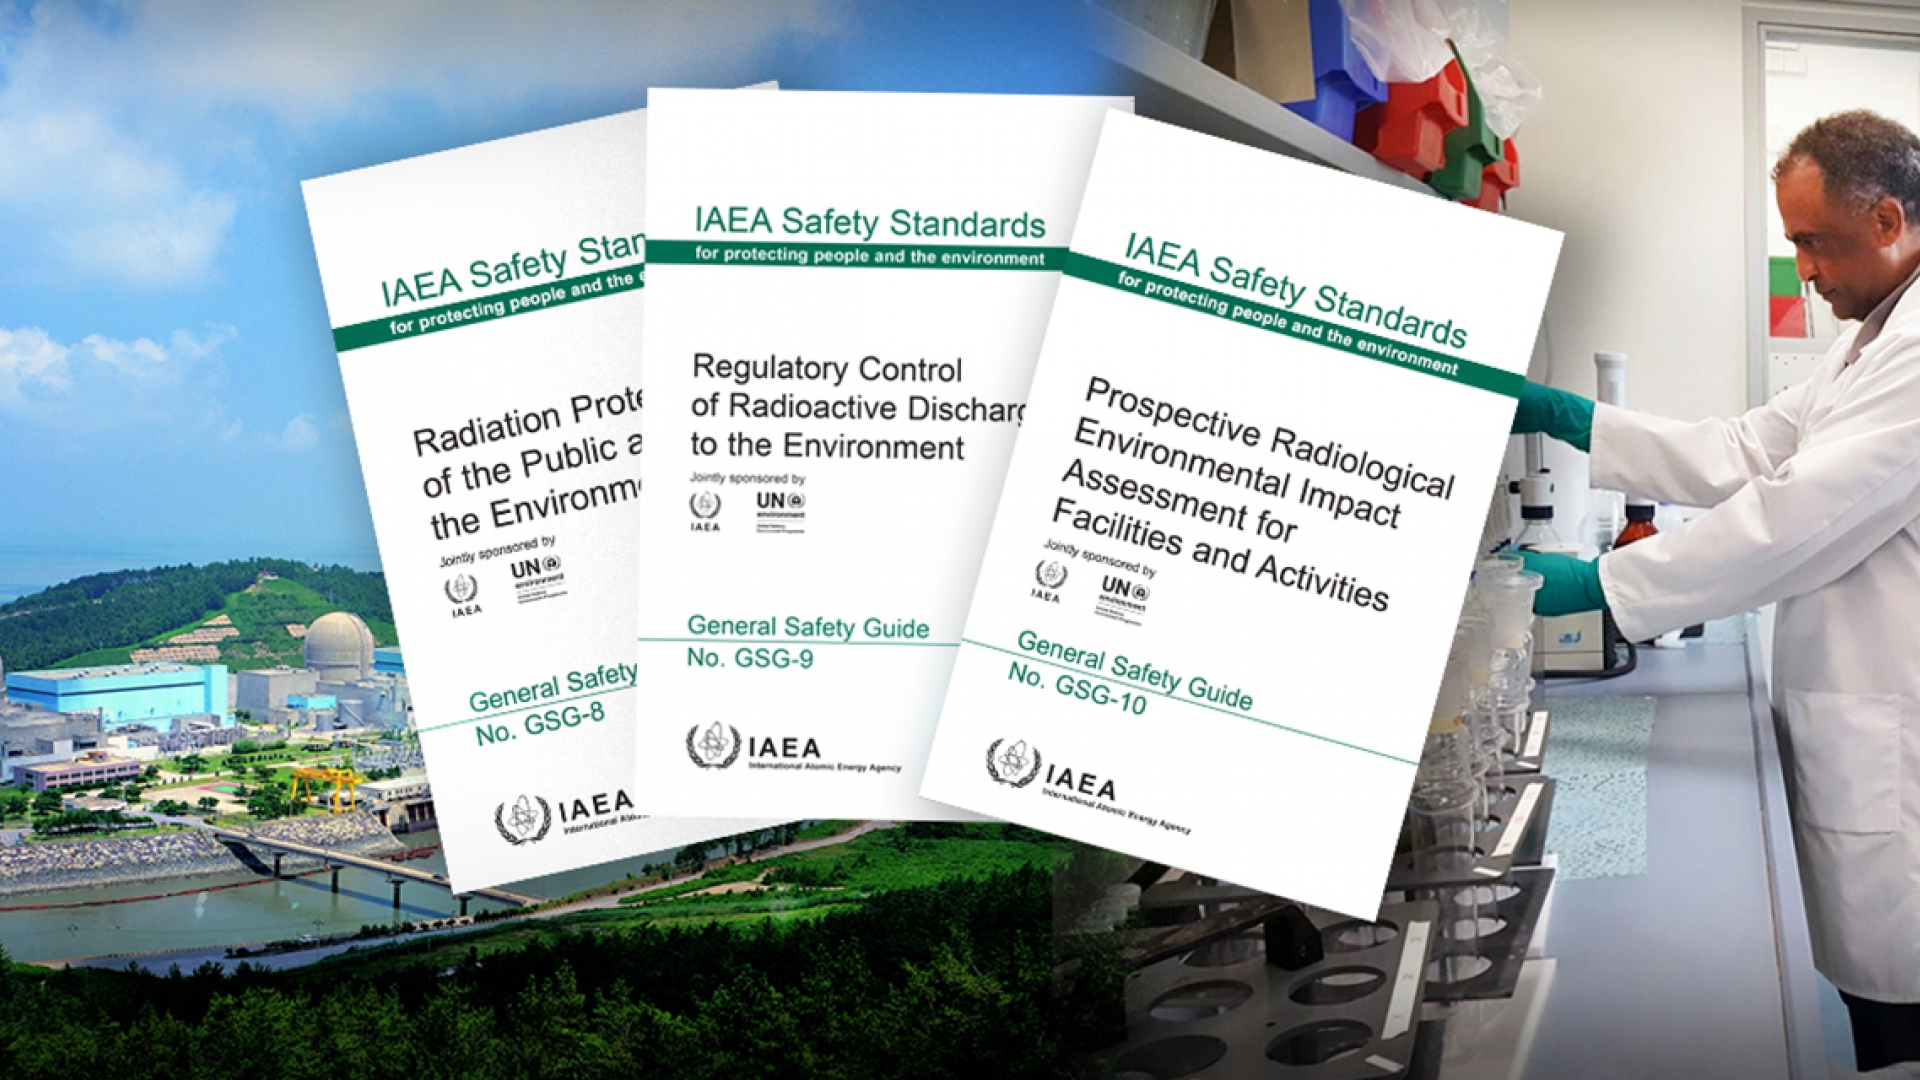 Radiation Safety And Protection Standards